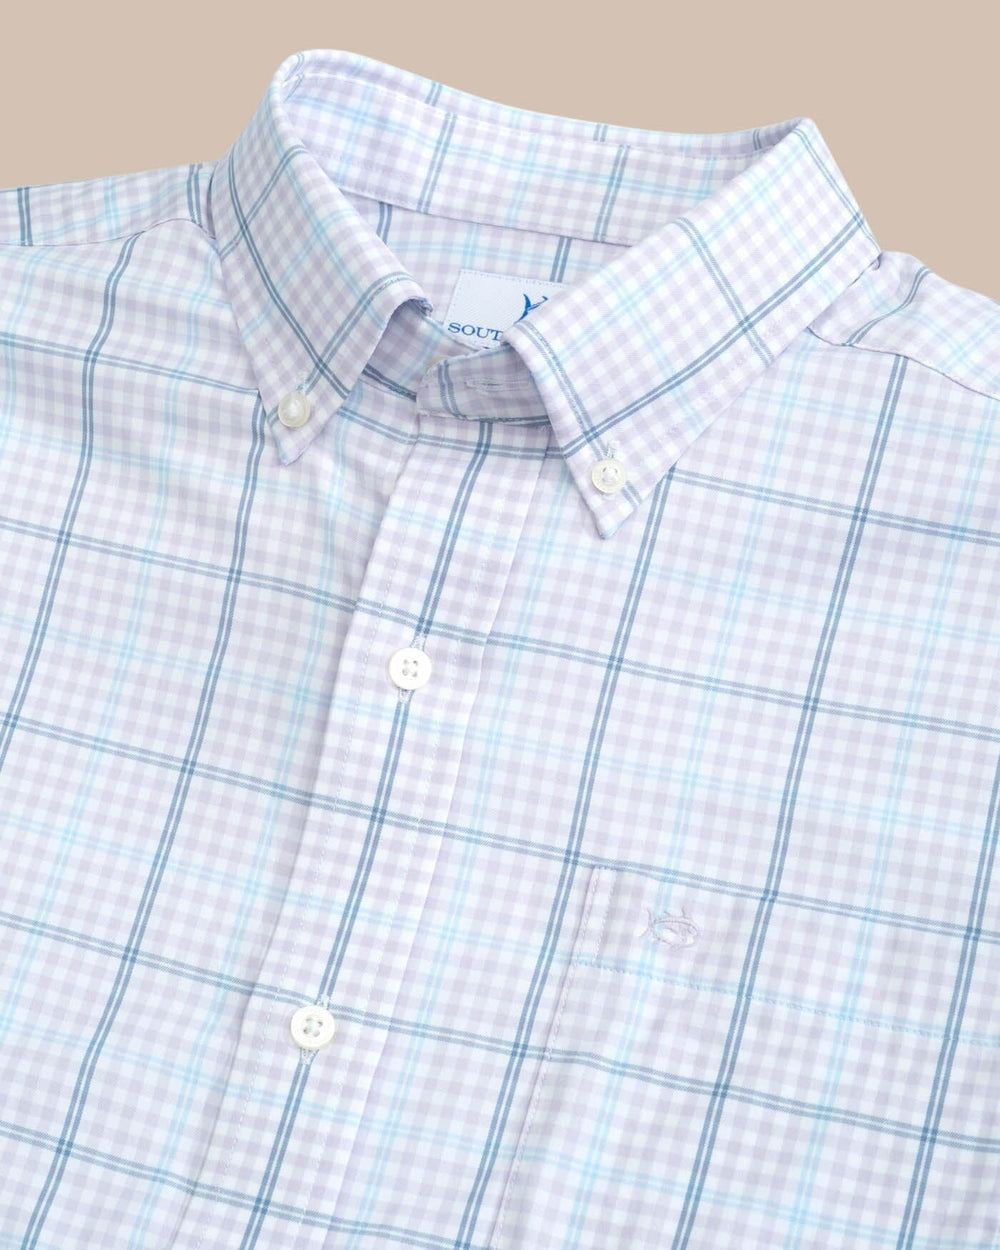 The detail view of the Southern Tide brrr Intercoastal Rainer Check Long Sleeve Sportshirt by Southern Tide - Orchid Petal